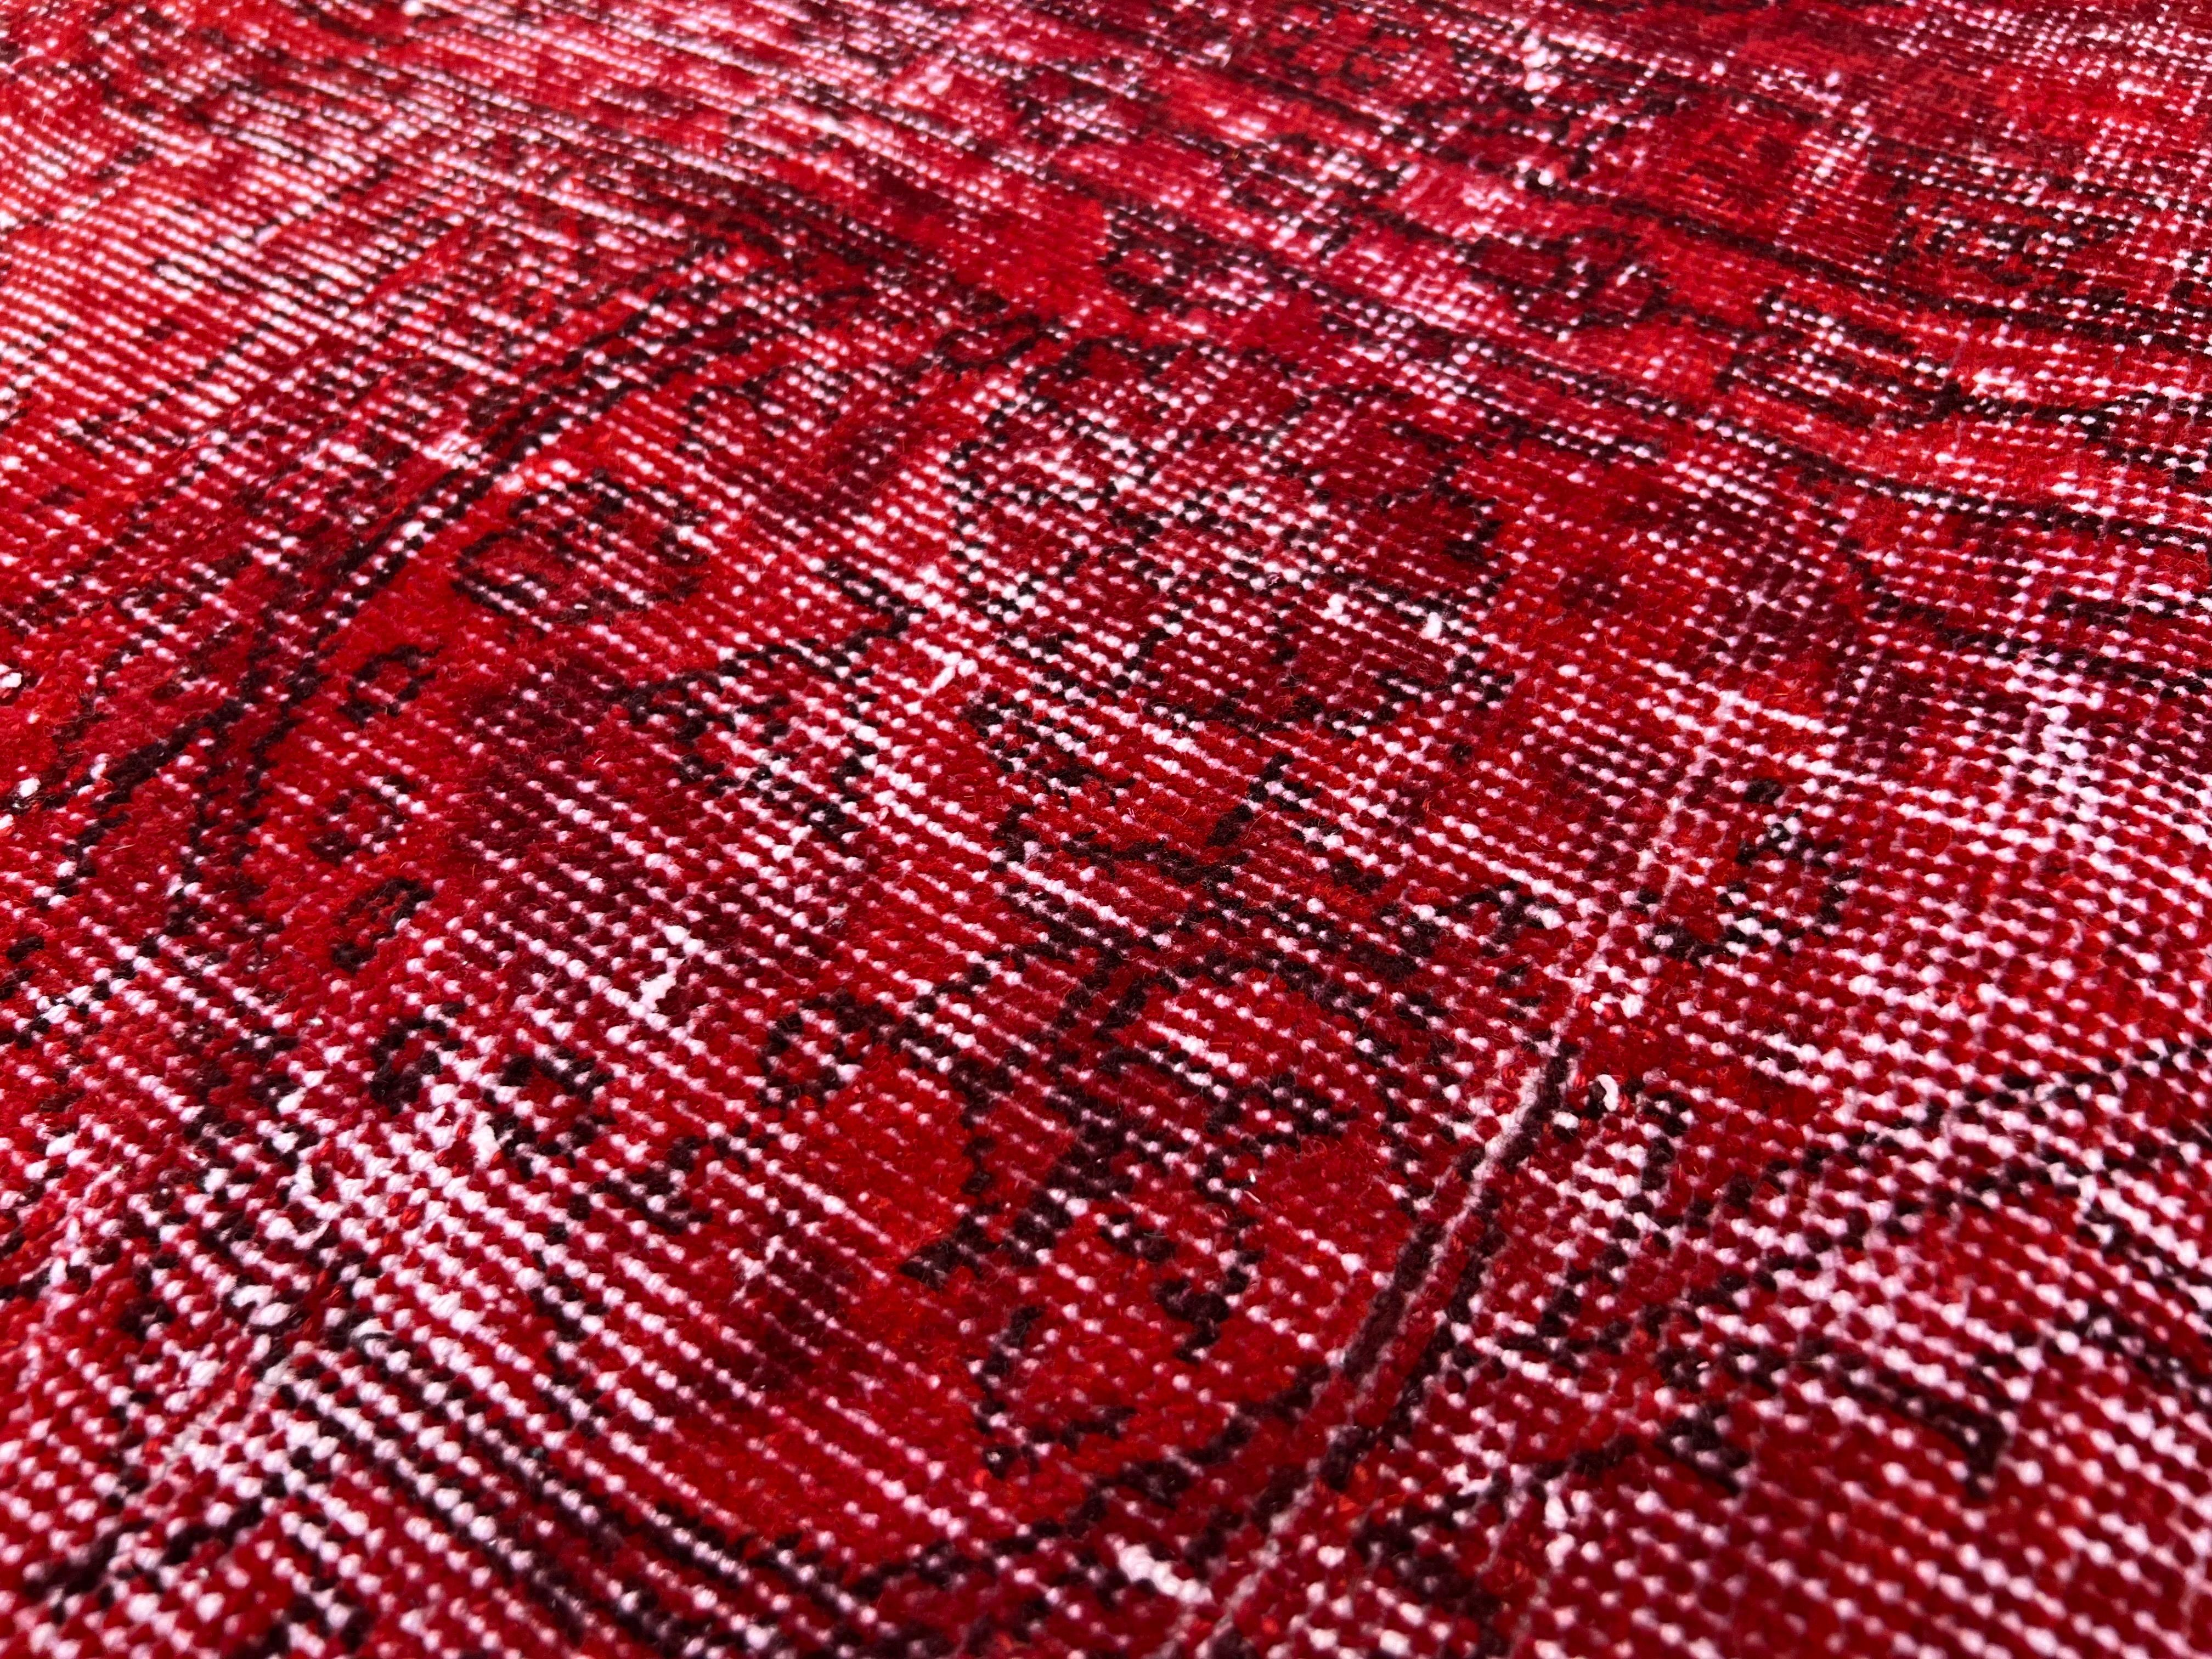 Wool 8.4x12.8 ft Modern Handmade Area Rug OverDyed in Red, Shabby Chic Turkish Carpet For Sale